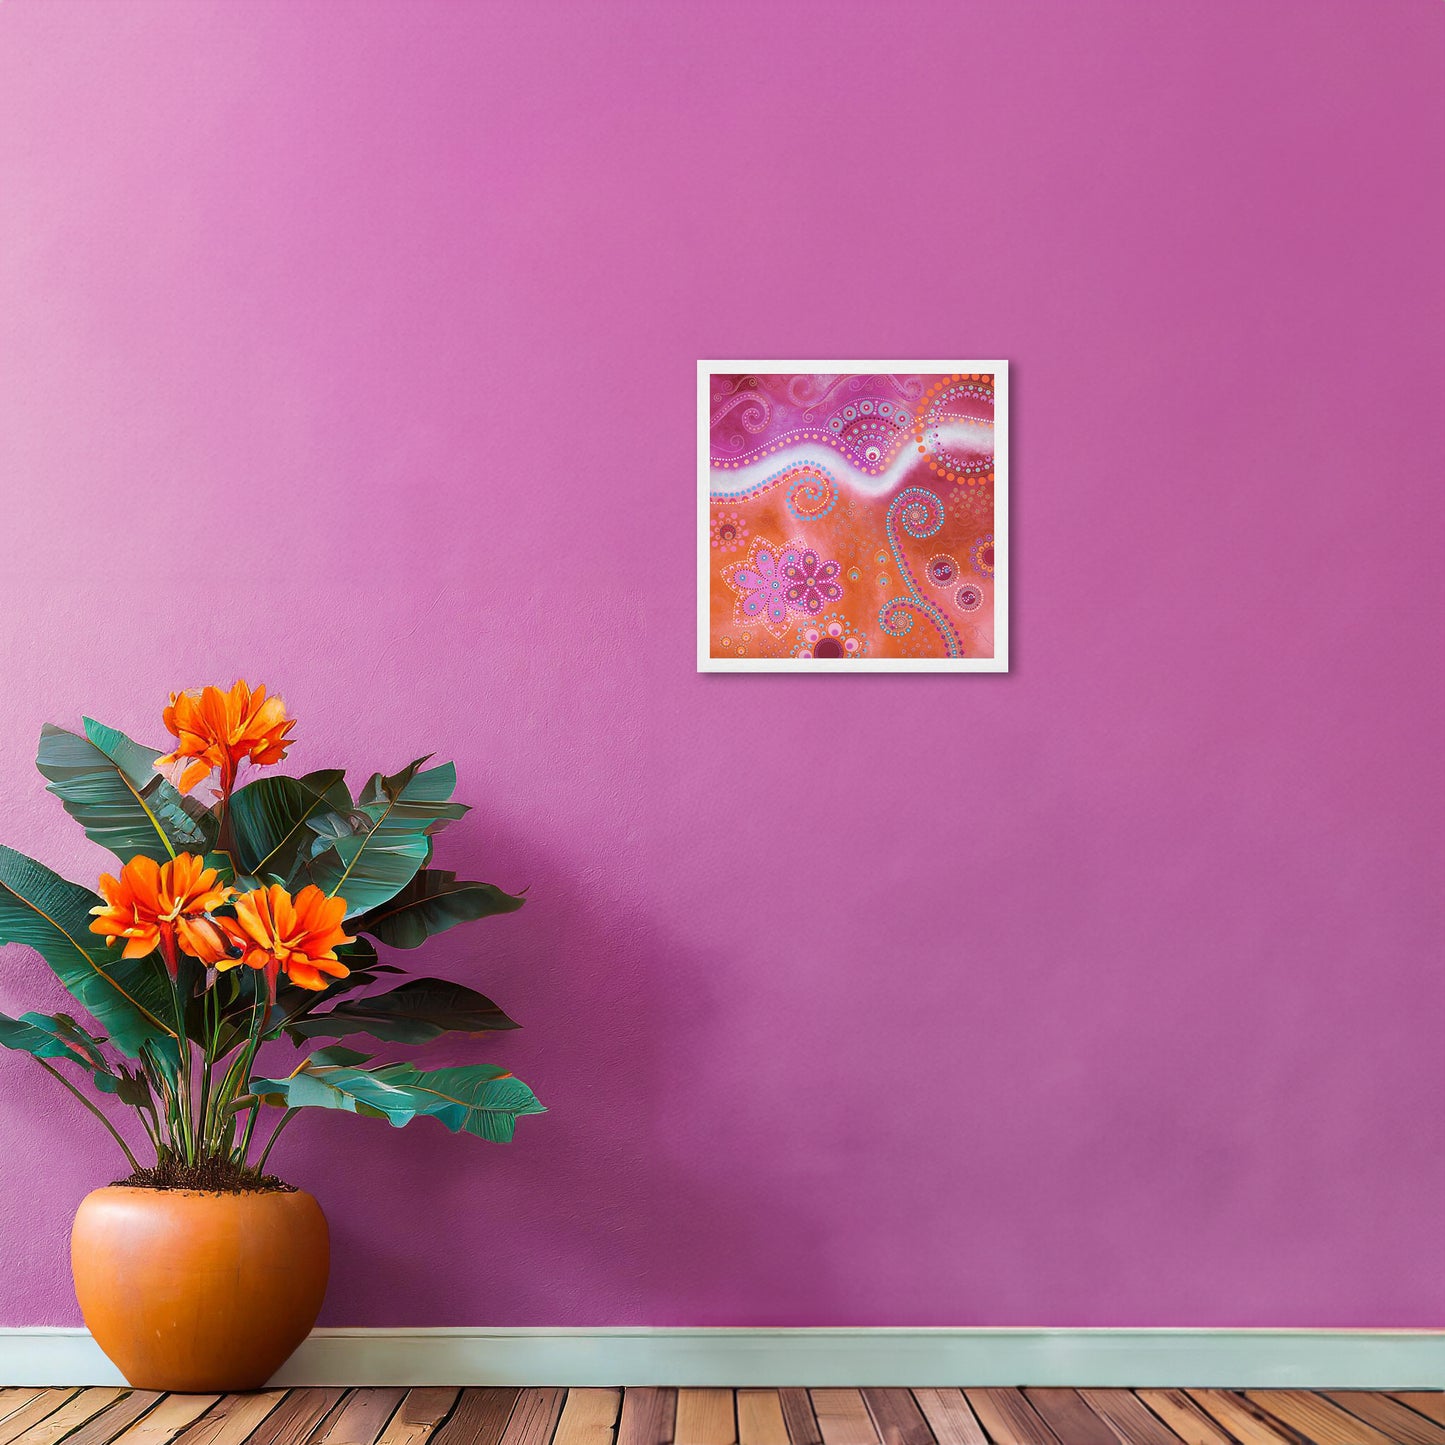 "The Happiness inside" - Pink and orange - by Fanny Fay Engström